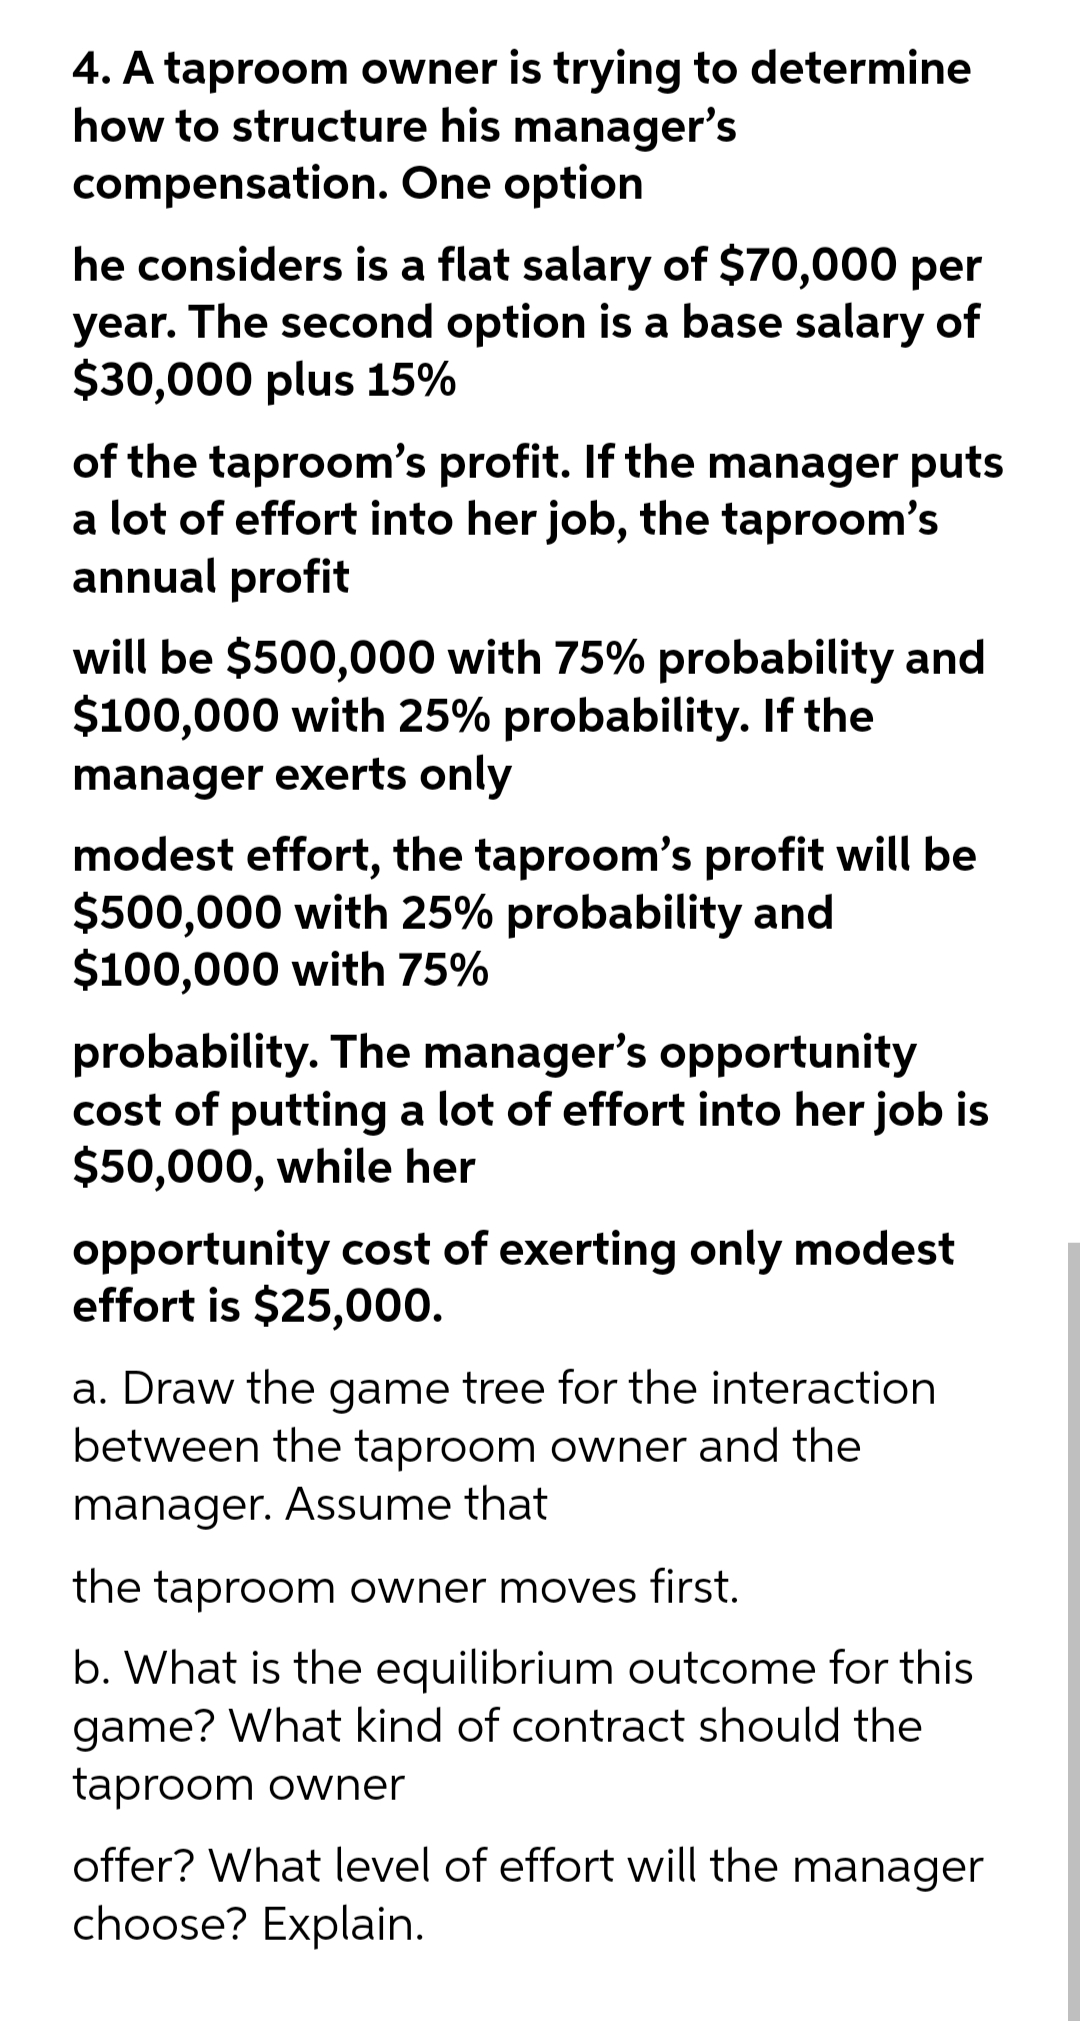 4. A taproom owner is trying to determine
how to structure his manager's
compensation. One option
he considers is a flat salary of $70,000 per
year. The second option is a base salary of
$30,000 plus 15%
of the taproom's profit. If the manager puts
a lot of effort into her job, the taproom's
annual profit
will be $500,000 with 75% probability and
$100,000 with 25% probability. If the
manager exerts only
modest effort, the taproom's profit will be
$500,000 with 25% probability and
$100,000 with 75%
probability. The manager's opportunity
cost of putting a lot of effort into her job is
$50,000, while her
opportunity cost of exerting only modest
effort is $25,000.
a. Draw the game tree for the interaction
between the taproom owner and the
manager. Assume that
the taproom owner moves first.
b. What is the equilibrium outcome for this
game? What kind of contract should the
taproom owner
offer? What level of effort will the manager
choose? Explain.
